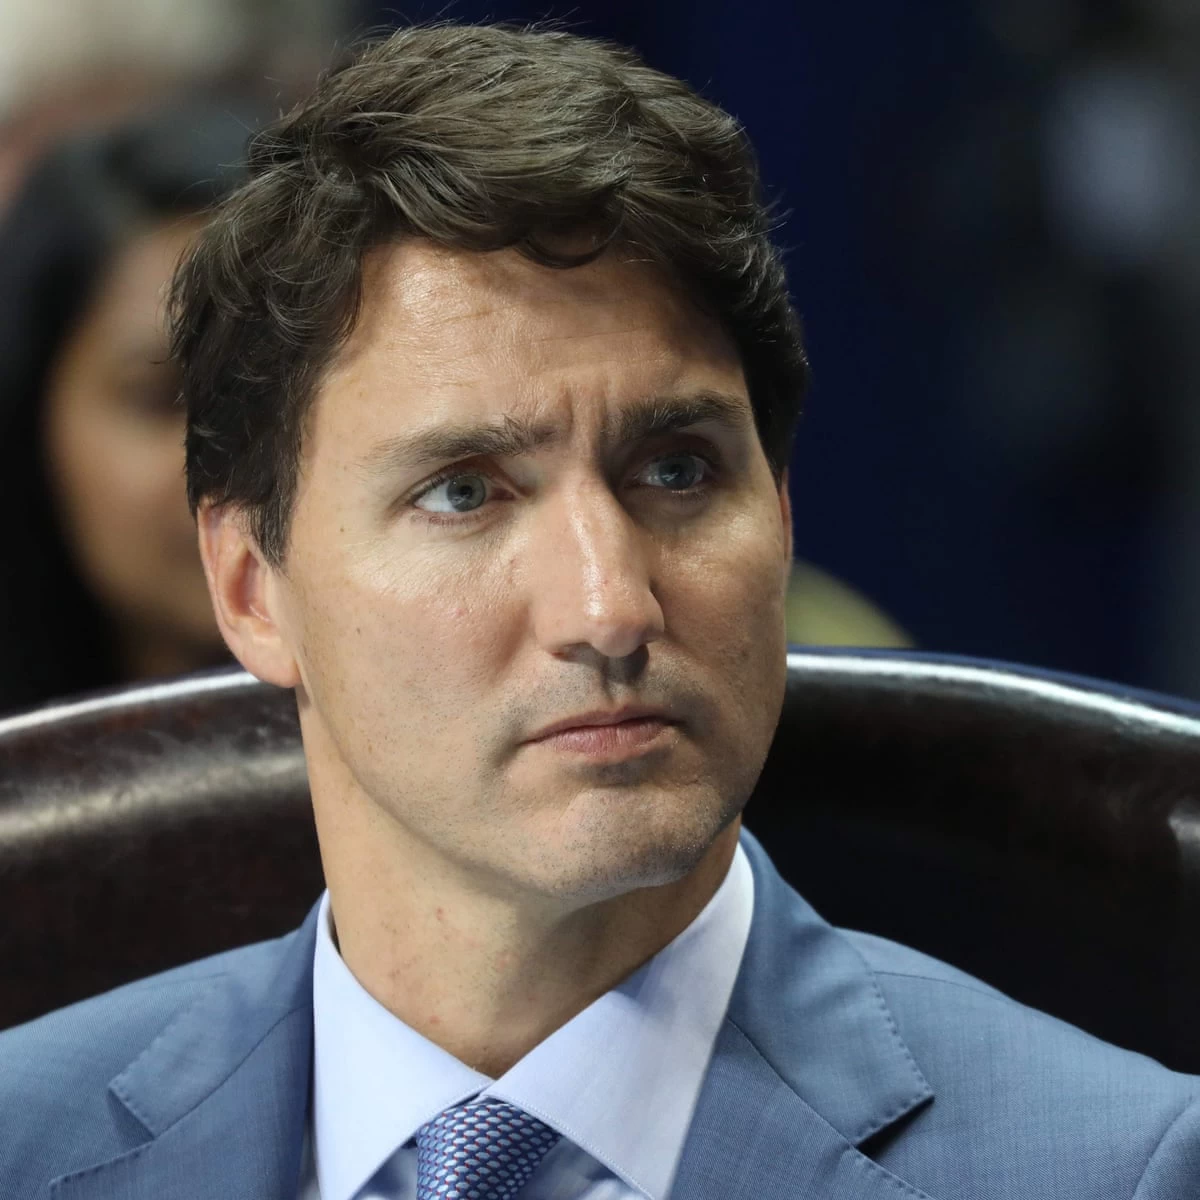 “It was a terrorist attack”; Canadian PM vows to fight far-right groups after brutal killing of Muslim family